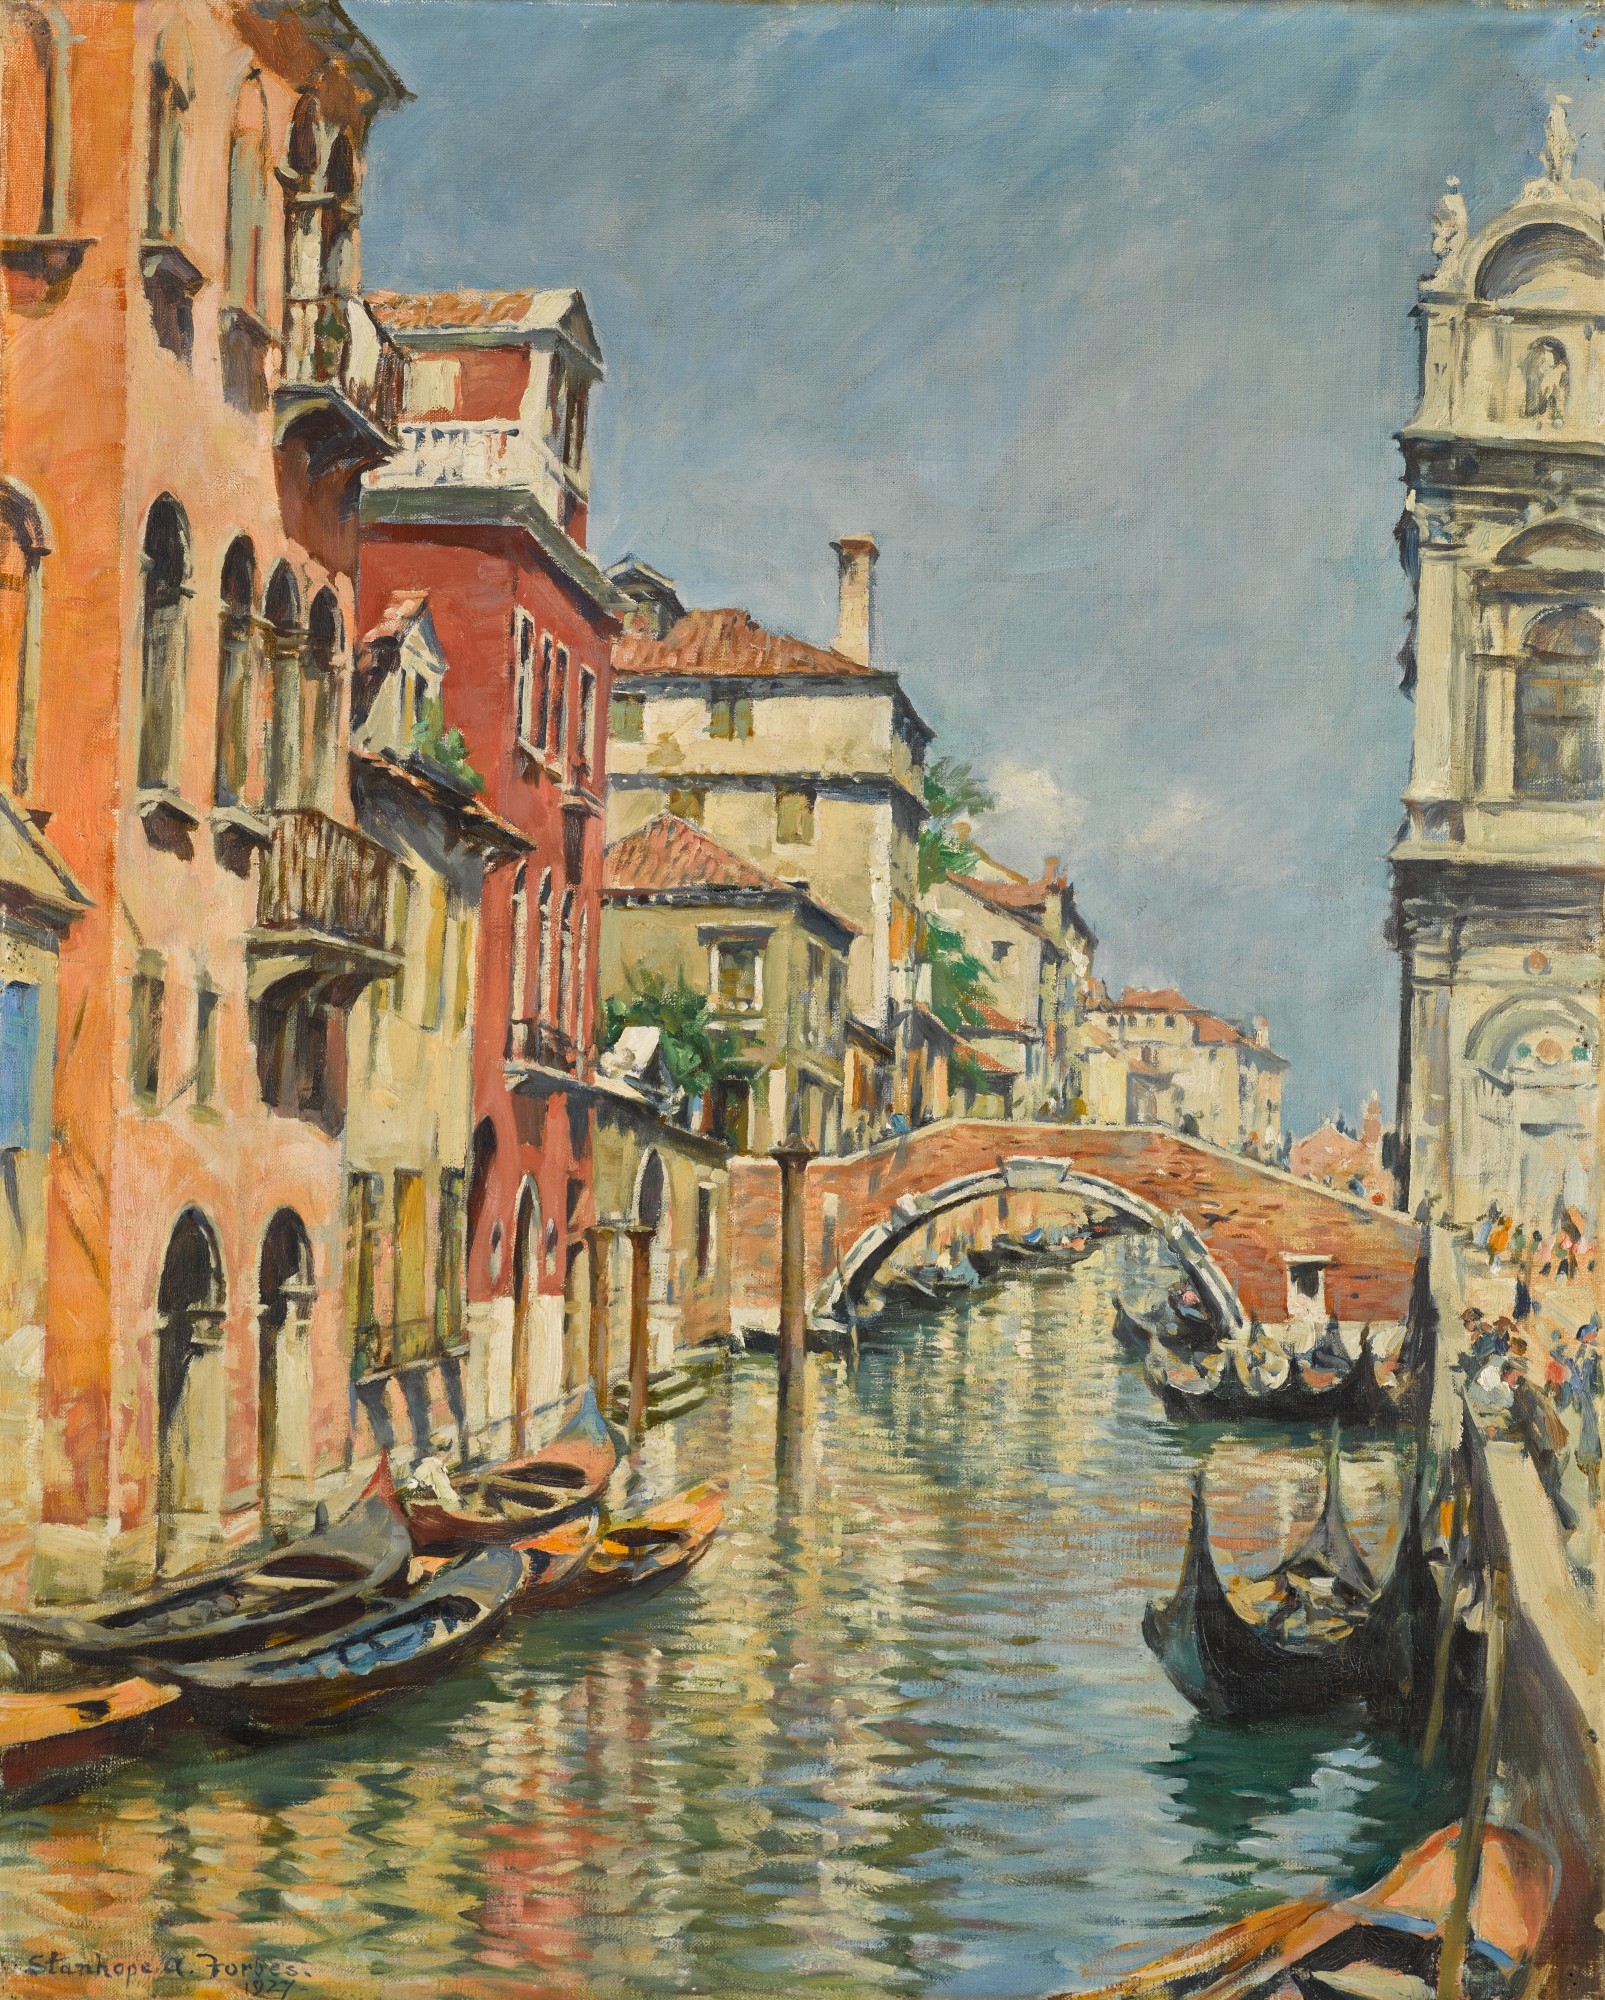 Reflections in the Canal, Venice by Stanhope Alexander Forbes, 1927